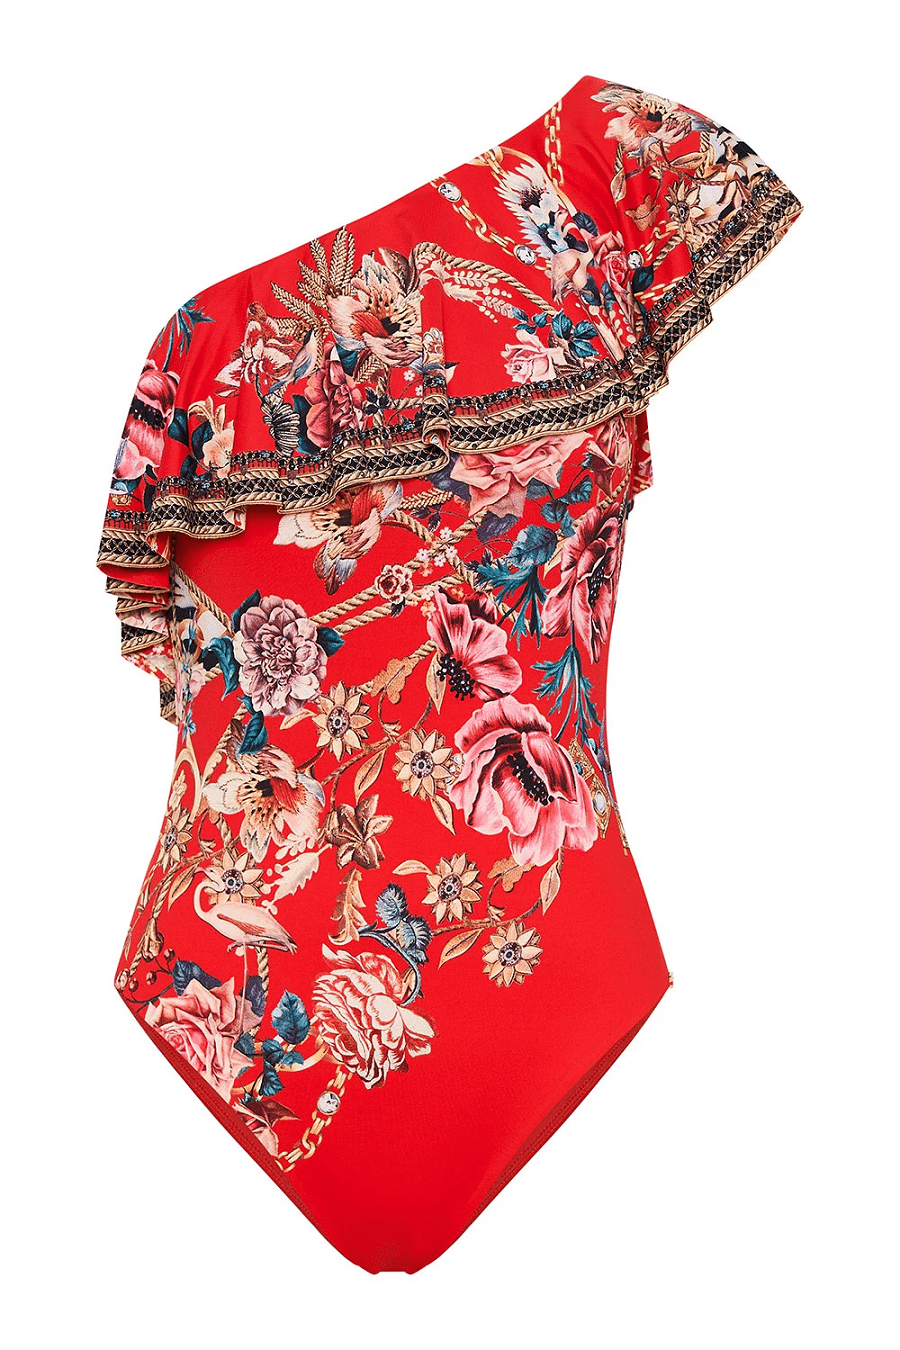 Red One Piece Swimsuit in Floral Print